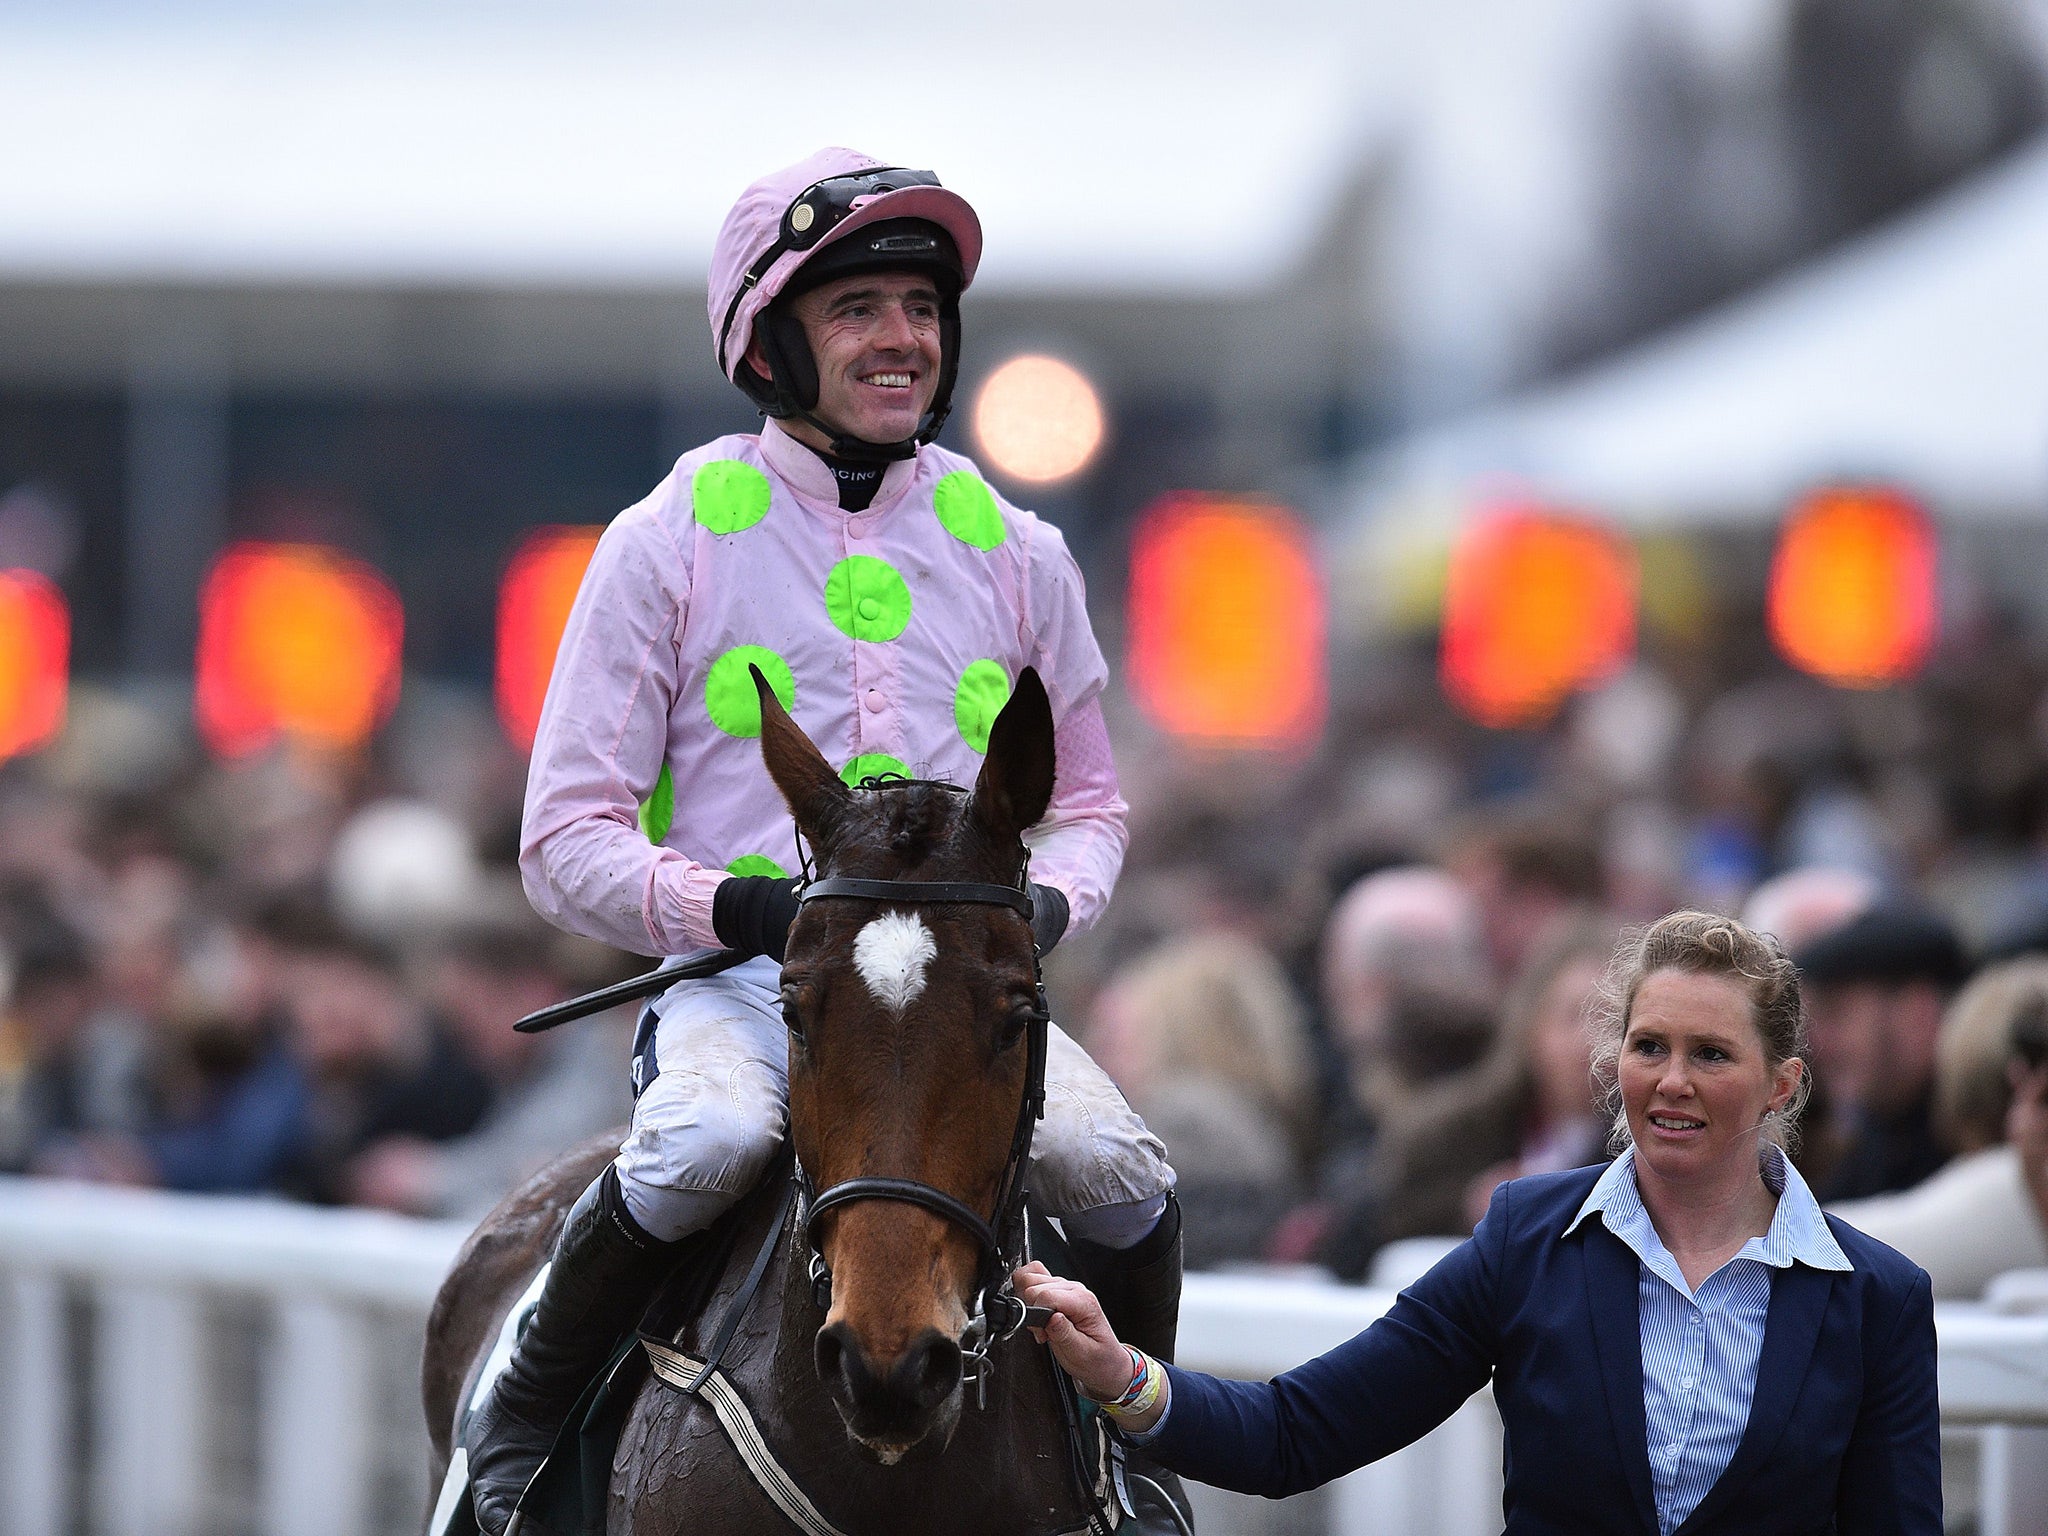 Ruby Walsh put two days of misfortune behind him to claim four wins on Thursday